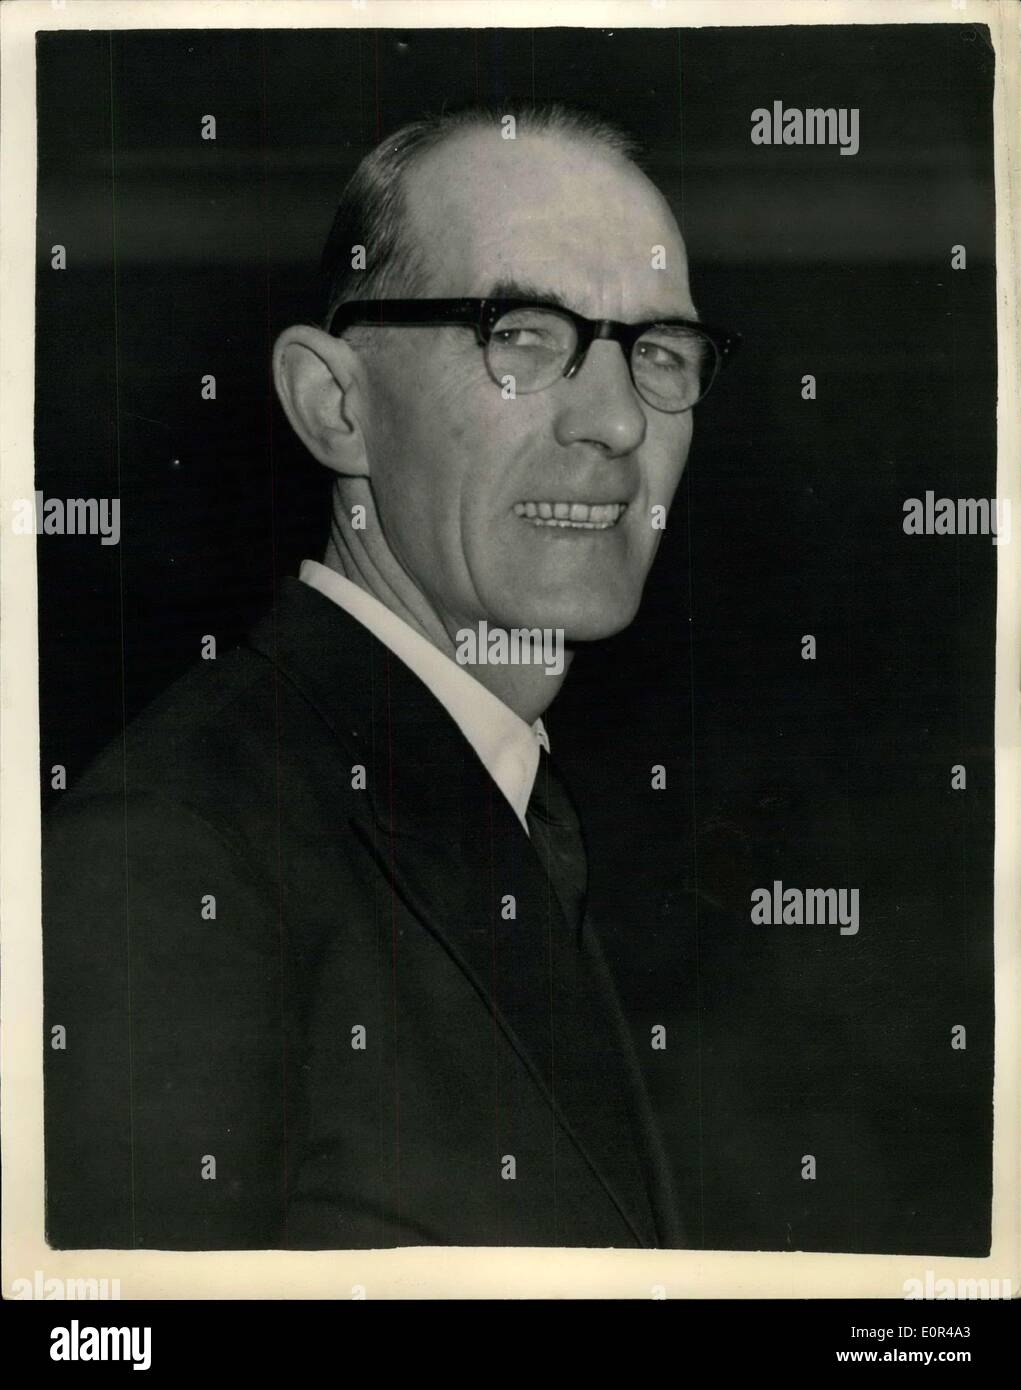 Dec. 12, 1957 - Lewisham Rail Inquiry: The official inquiry into the Lewisham train crash, opened today at the Great Western Hotel, Paddignton. Photo Shows Mr. A.P. Williams, Station Master at St. John's a witness at today's inquiry. Stock Photo